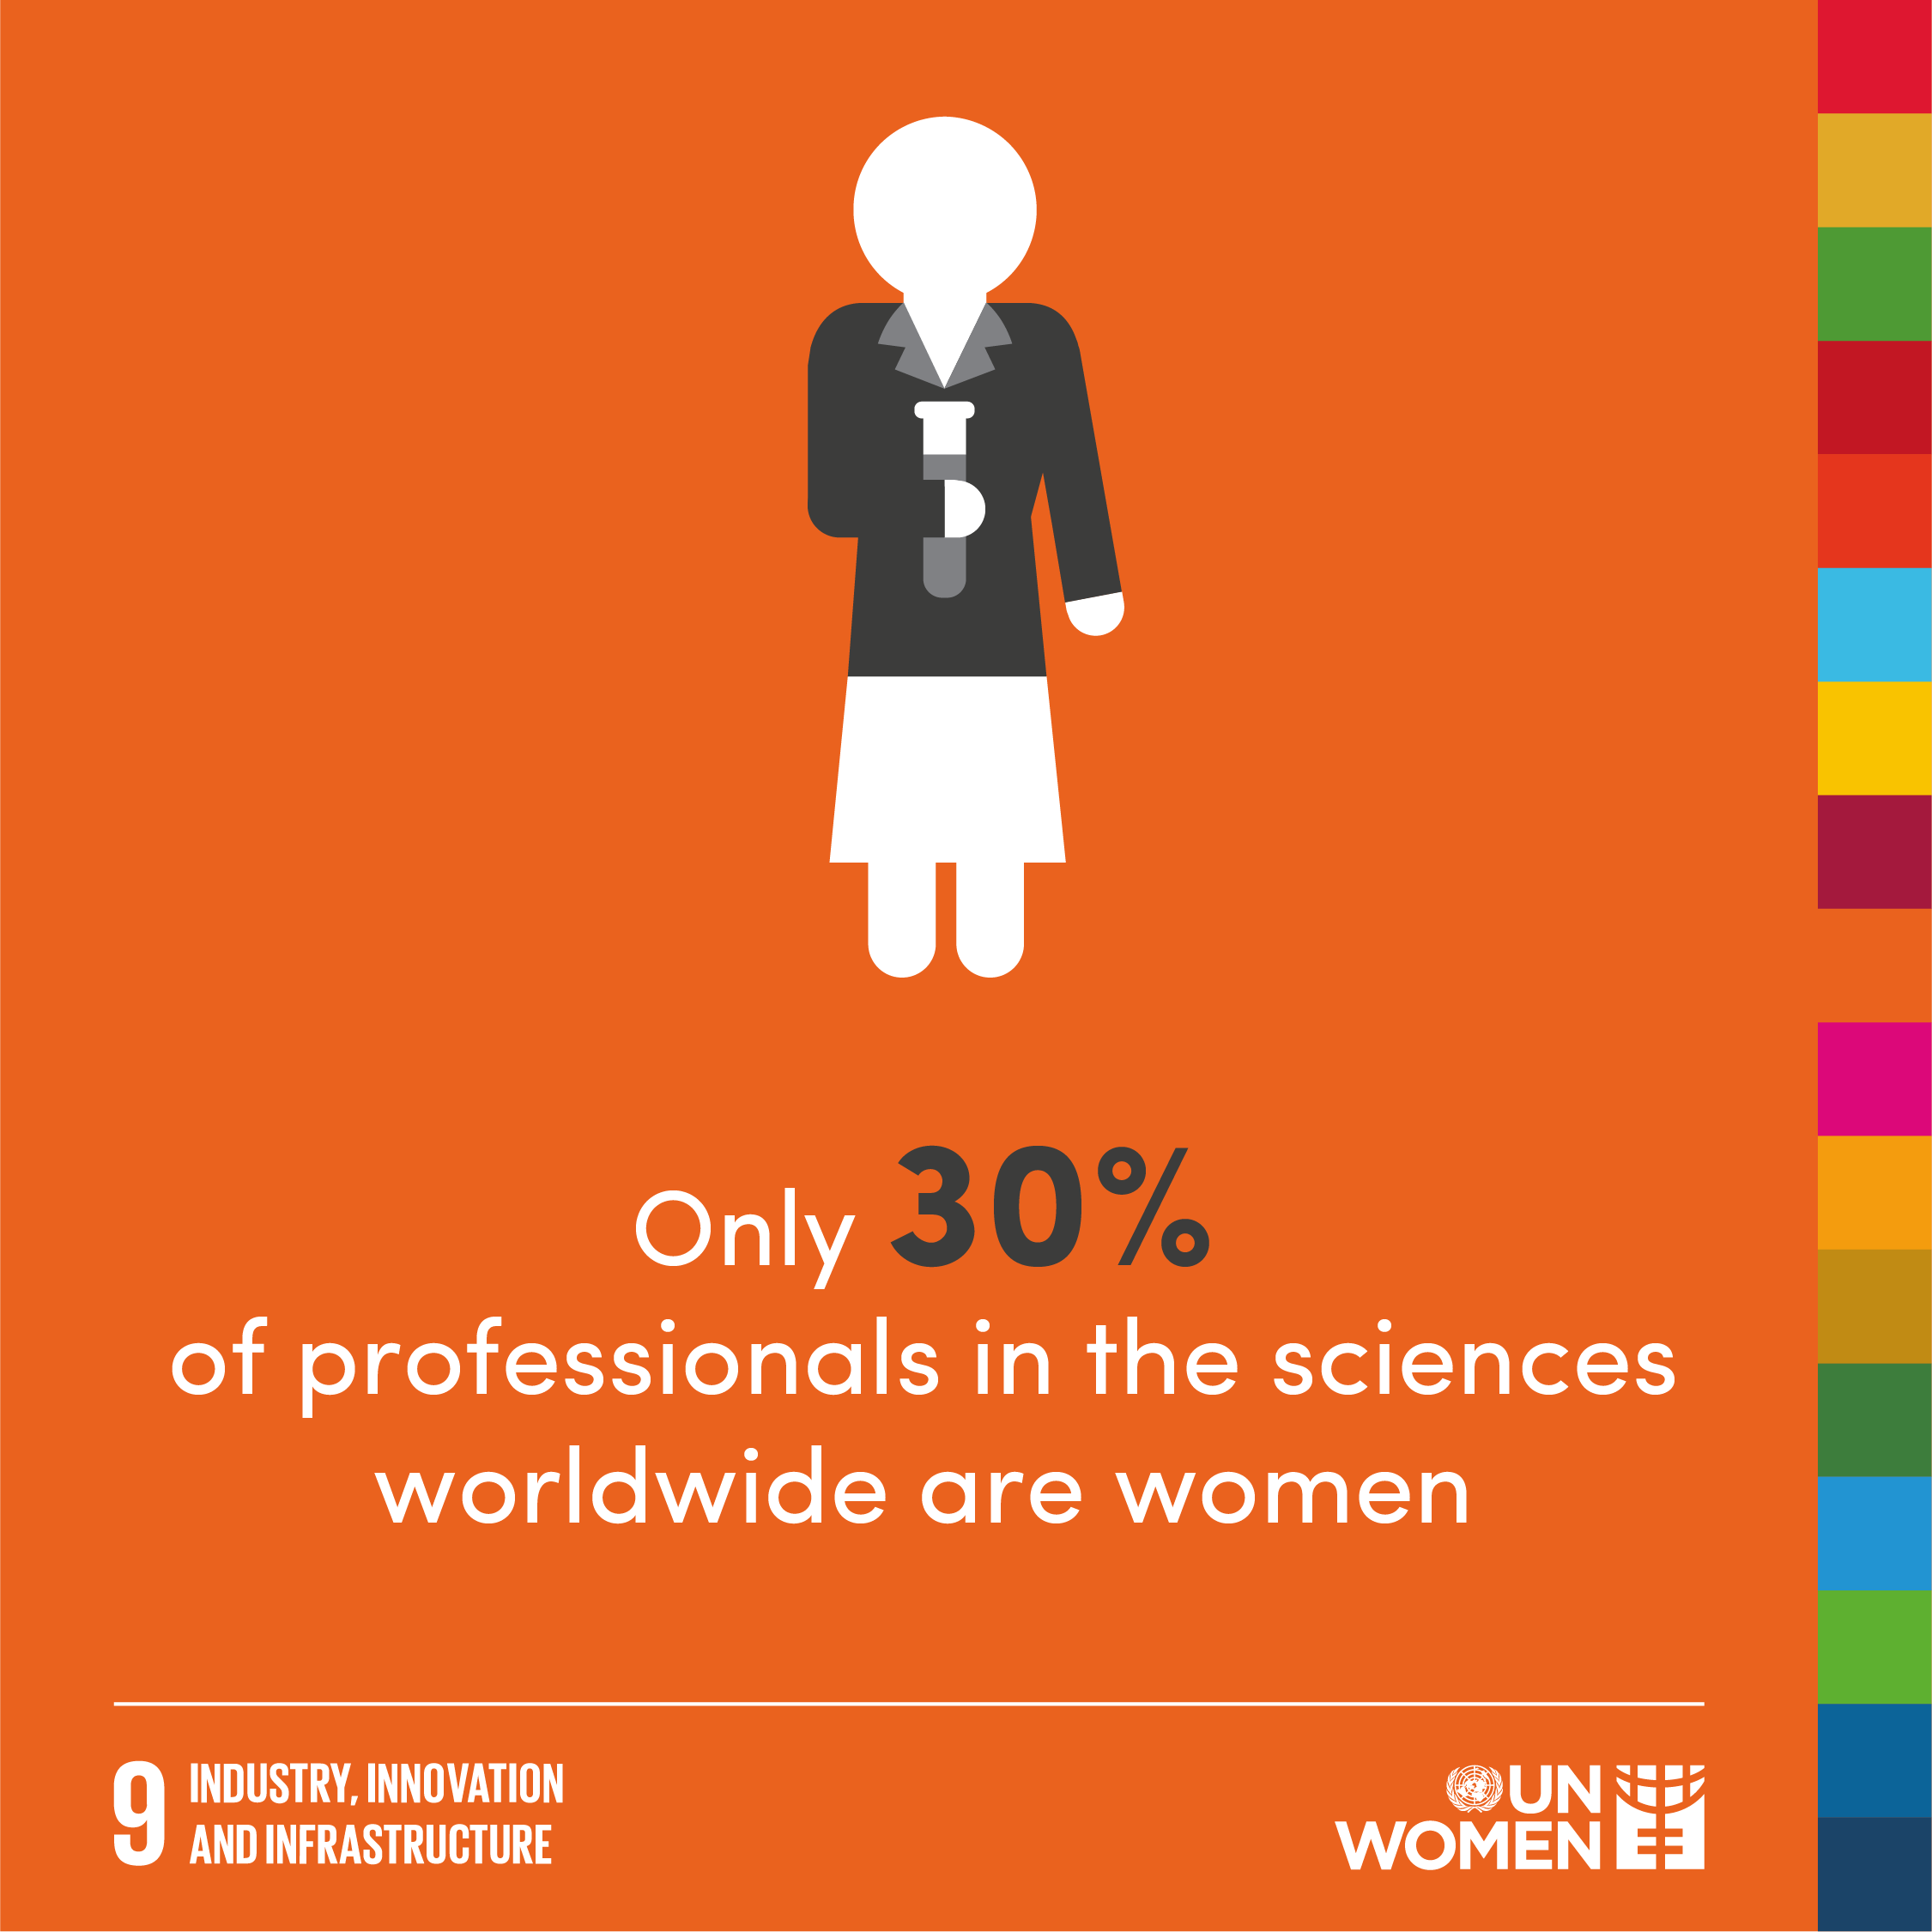 Only 30% of professionals in the sciences worldwide are women